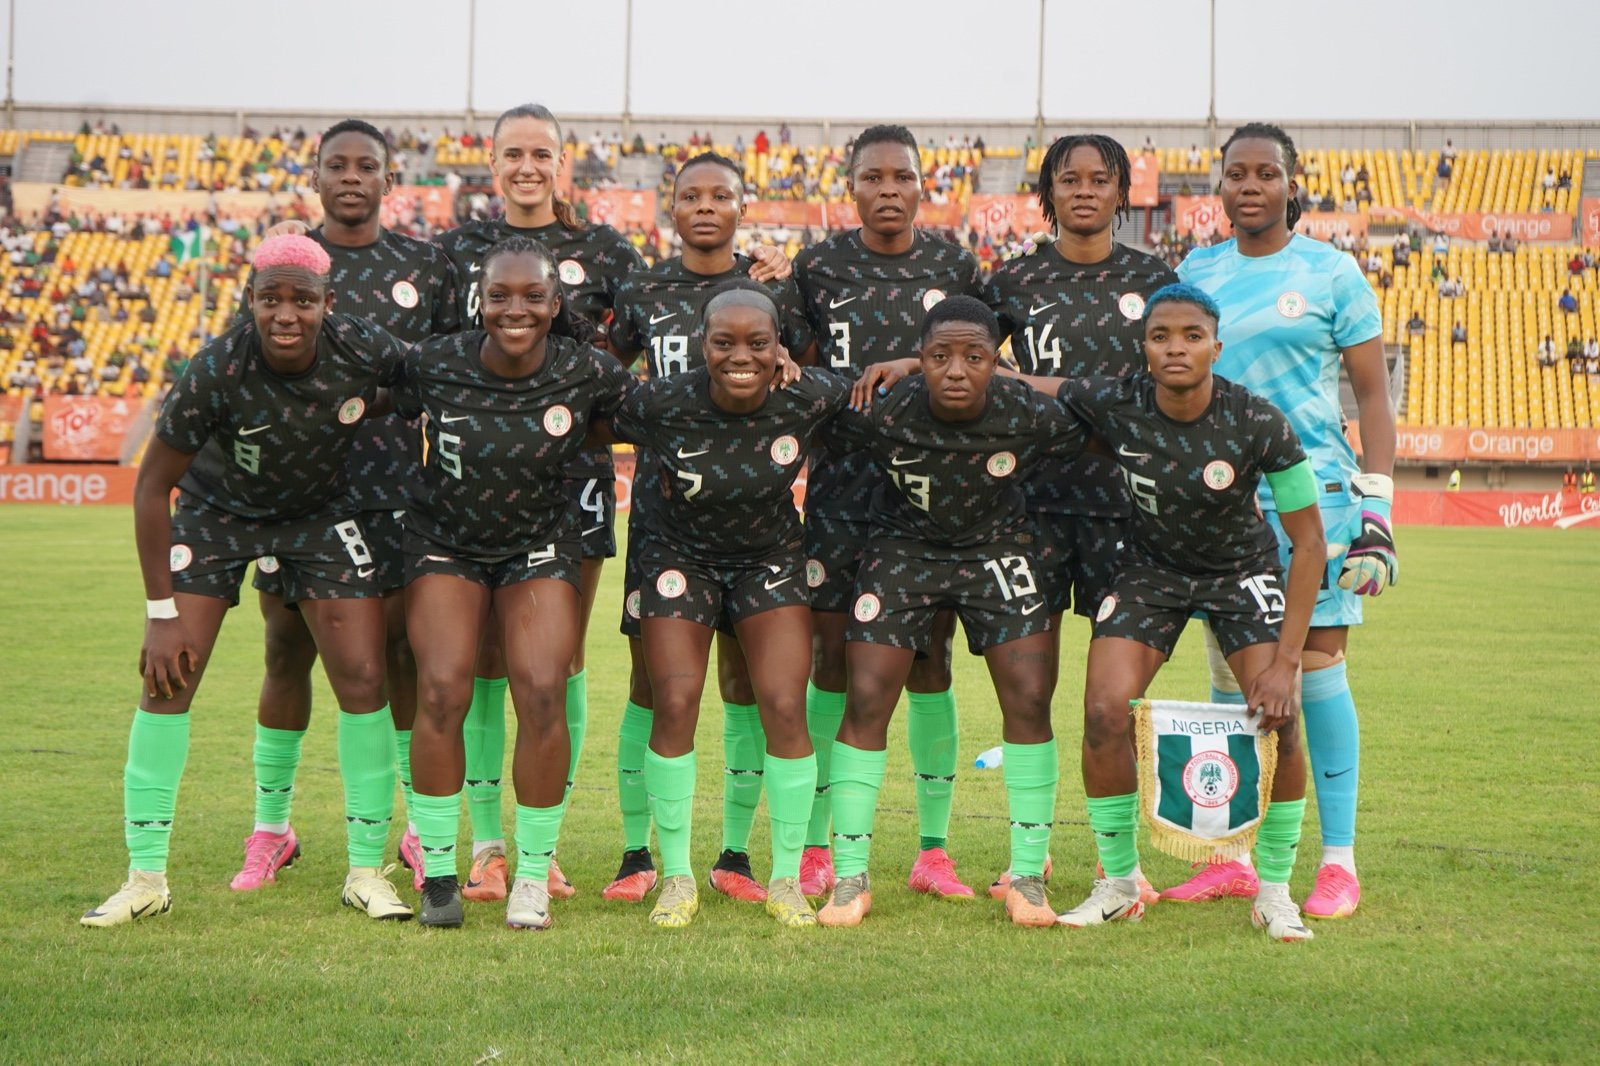 Olympic Qualifier: Falcons, Lionesses share spoils in Douala